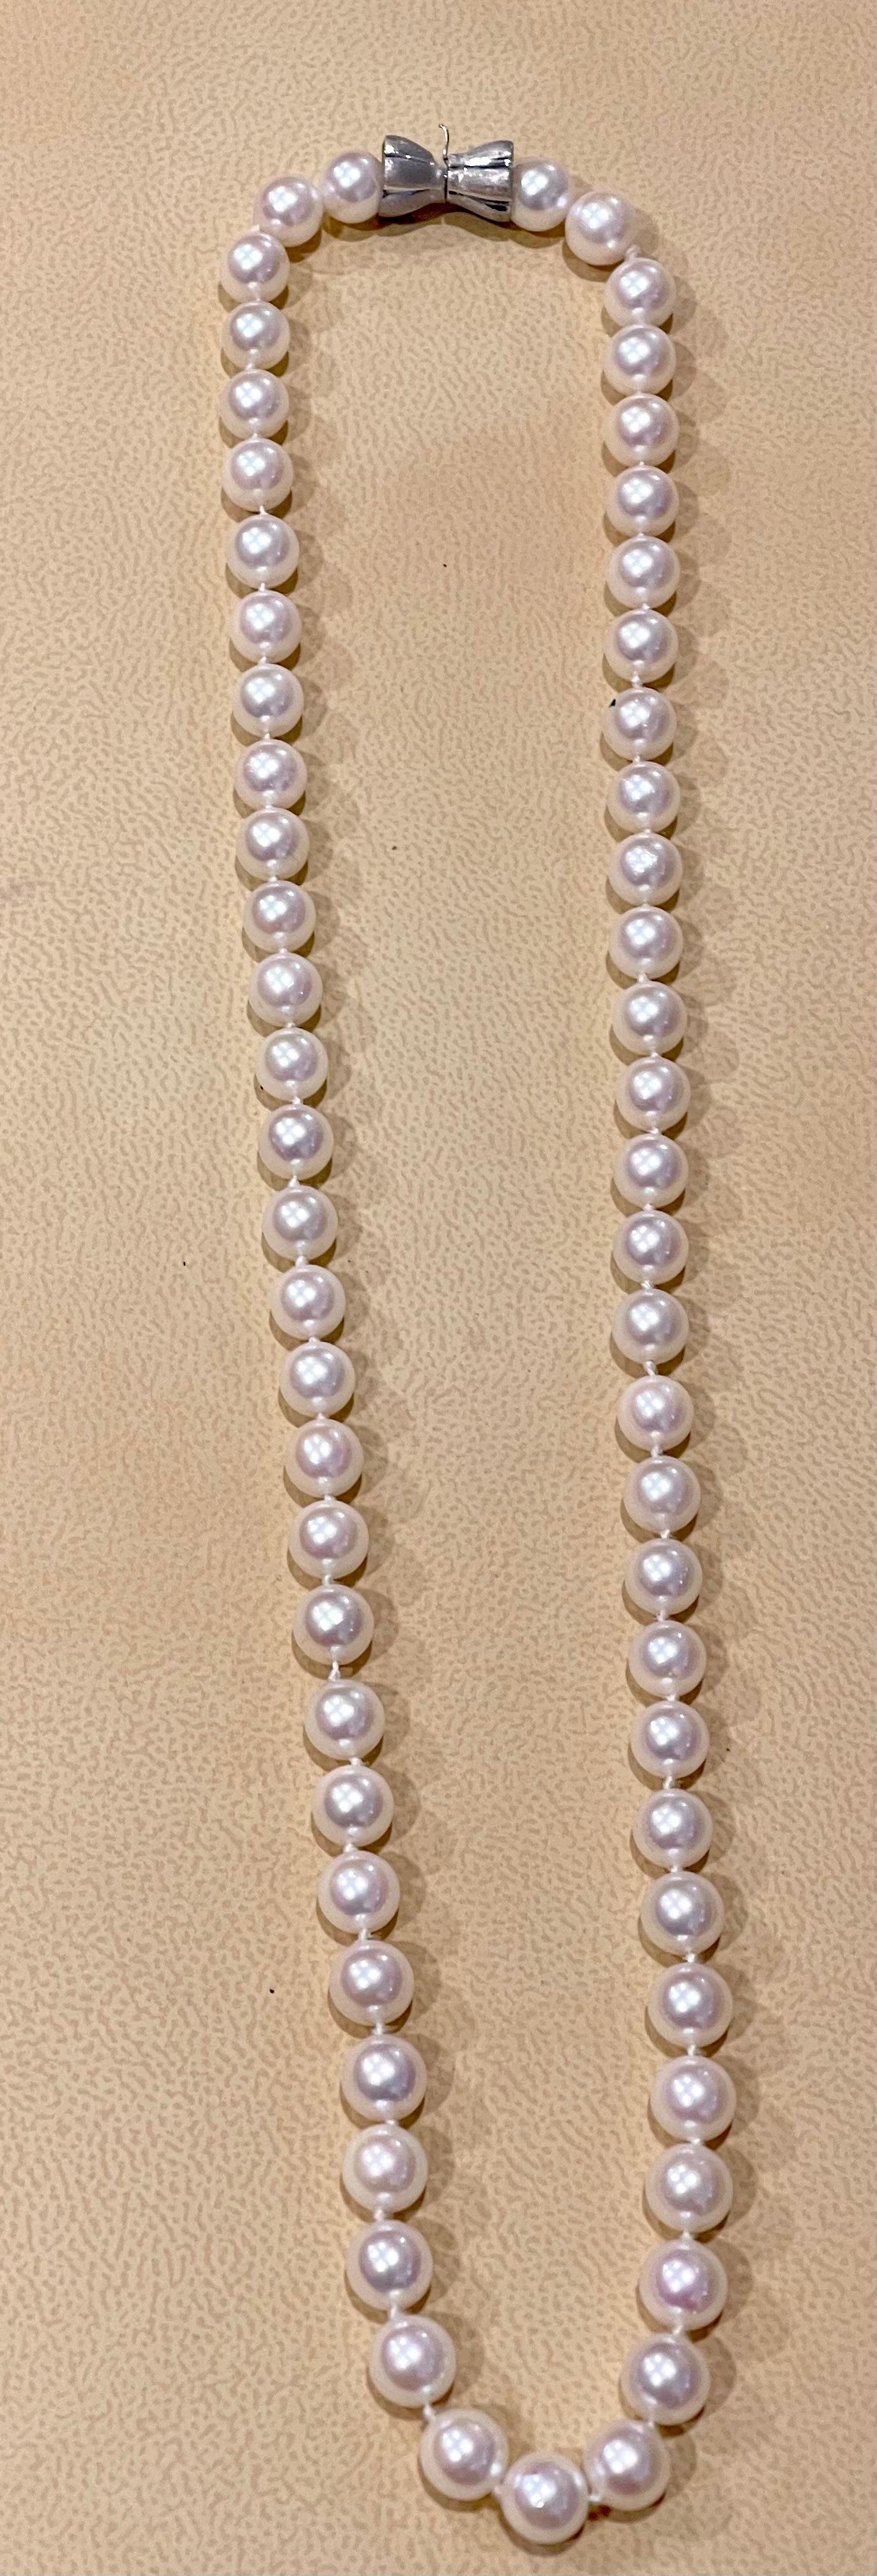 This marvelous vintage Pearl necklace features 1 row of luscious  Japanese Akoya   pearls with 14 karat White  gold
Clasp is beautiful with drum shape clasp
(measuring approx. 6.7mm 
 white  color
VINTAGE

PRE-OWNED 
 ESTATE PIECE

Length of  Strand